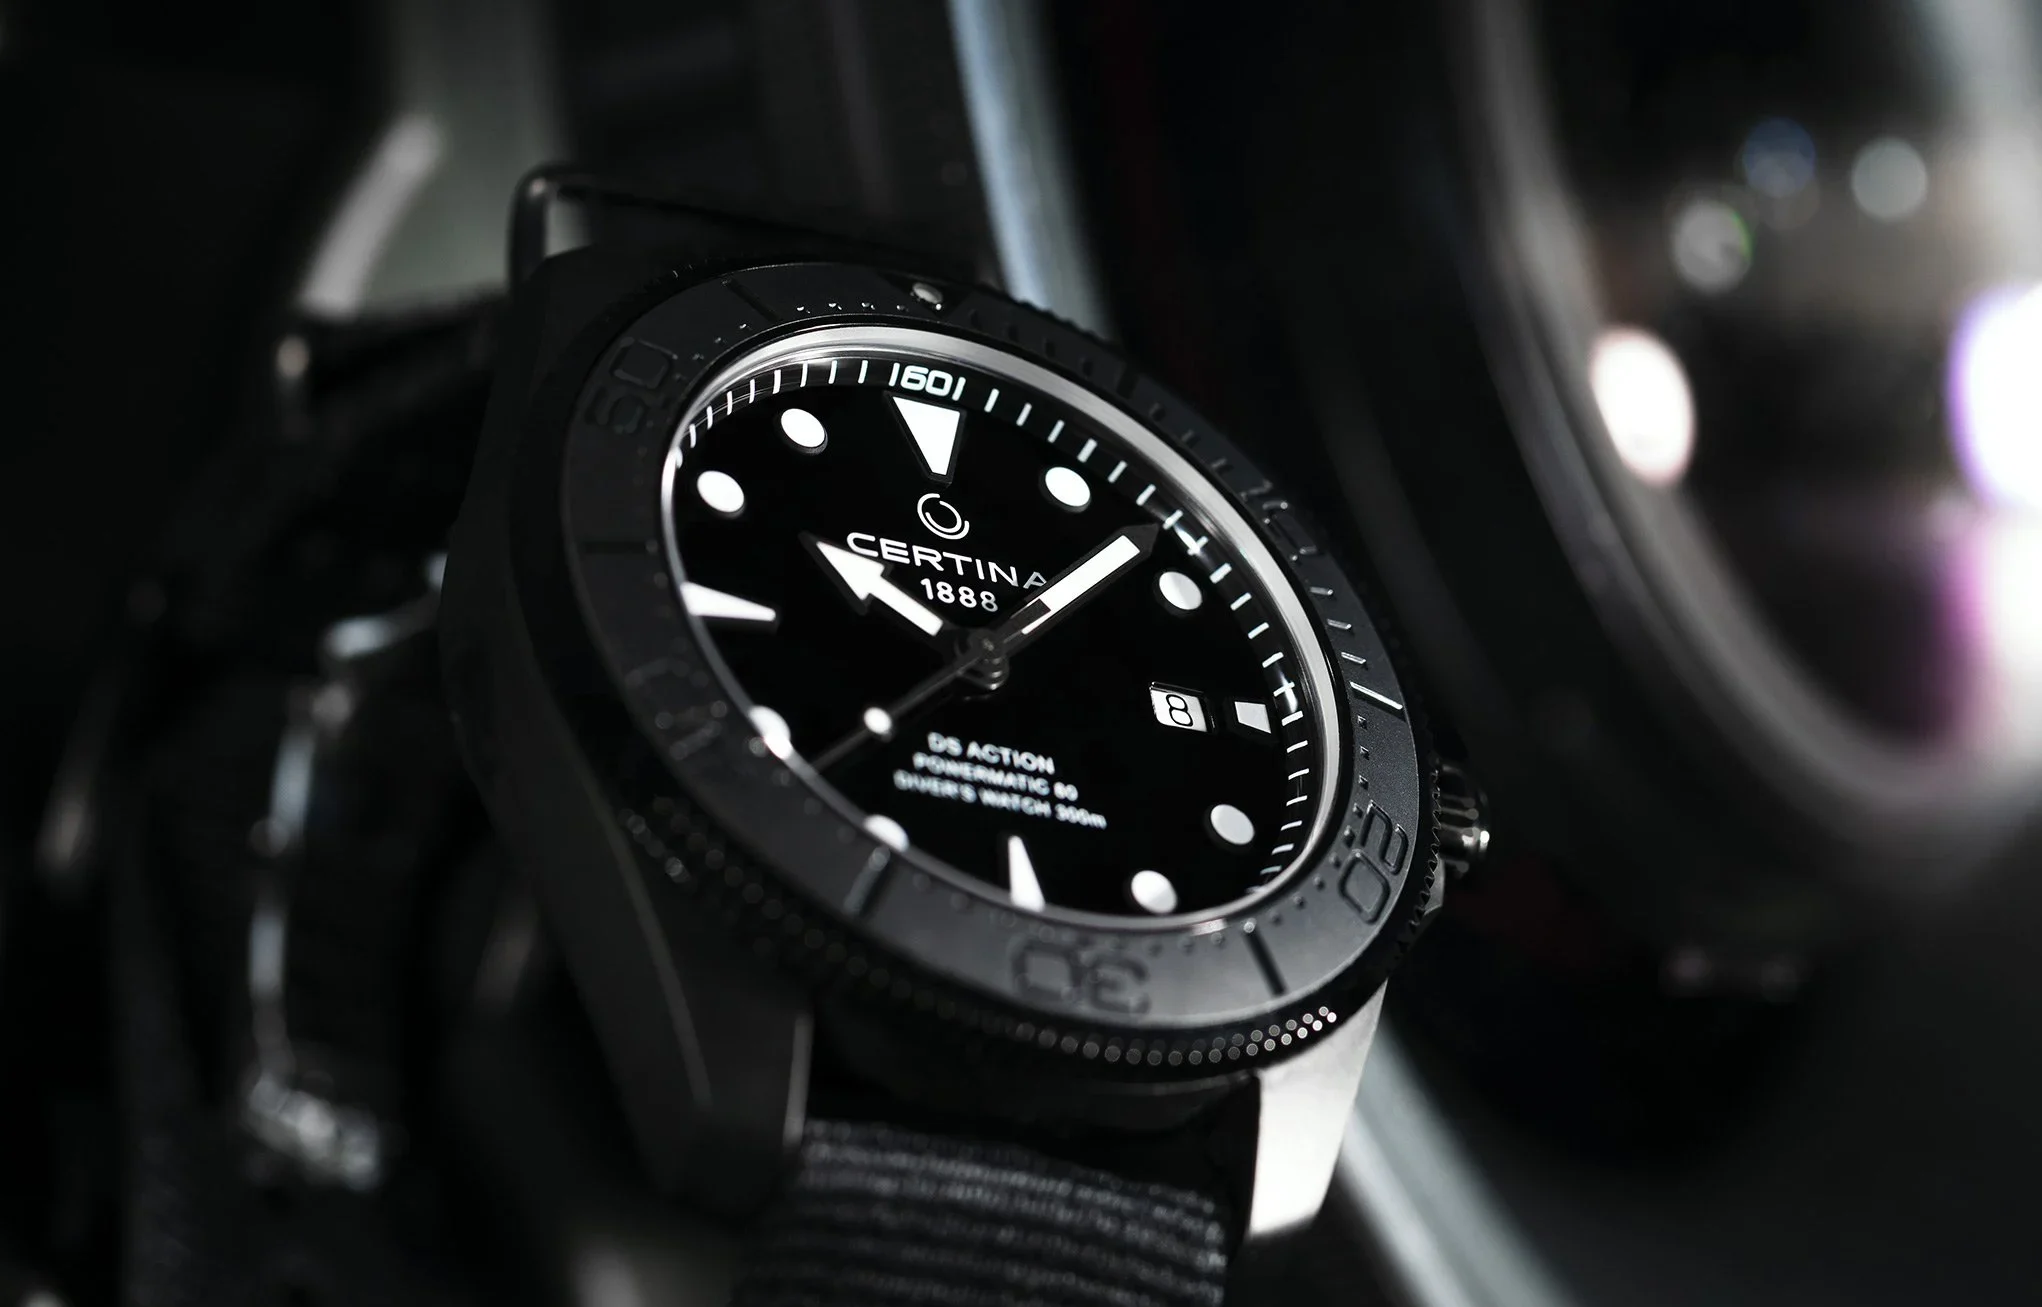 Certina Introduces Two Very Different and Intriguing Dive Watches to DS Action Diver Lineup